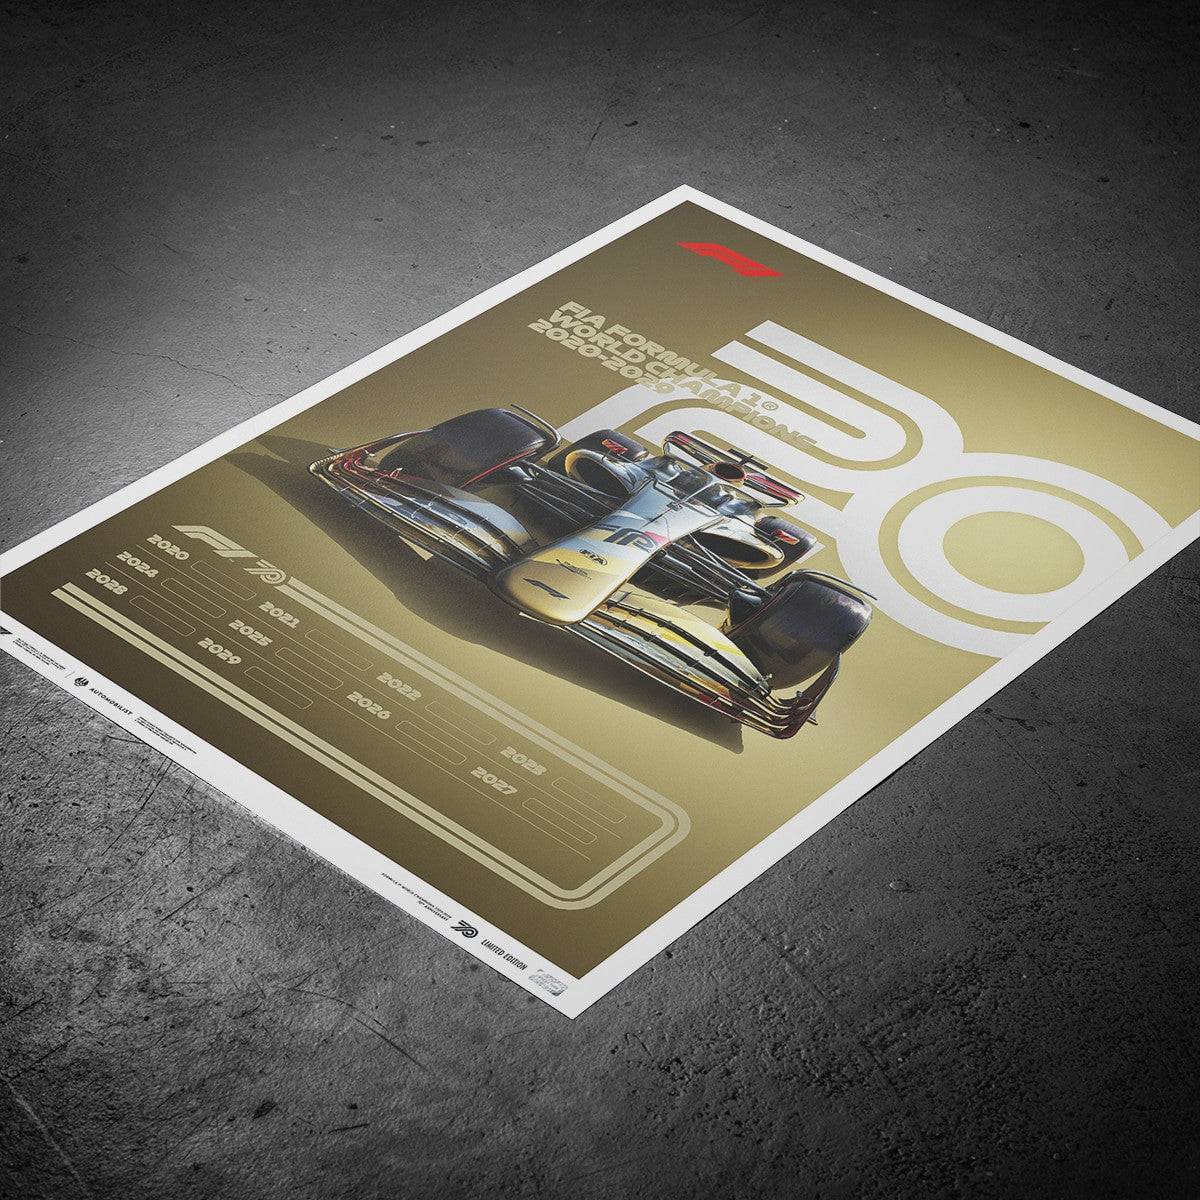 Poster F1 World champions 2020 - 2029 The future lies ahead Edition  limitée